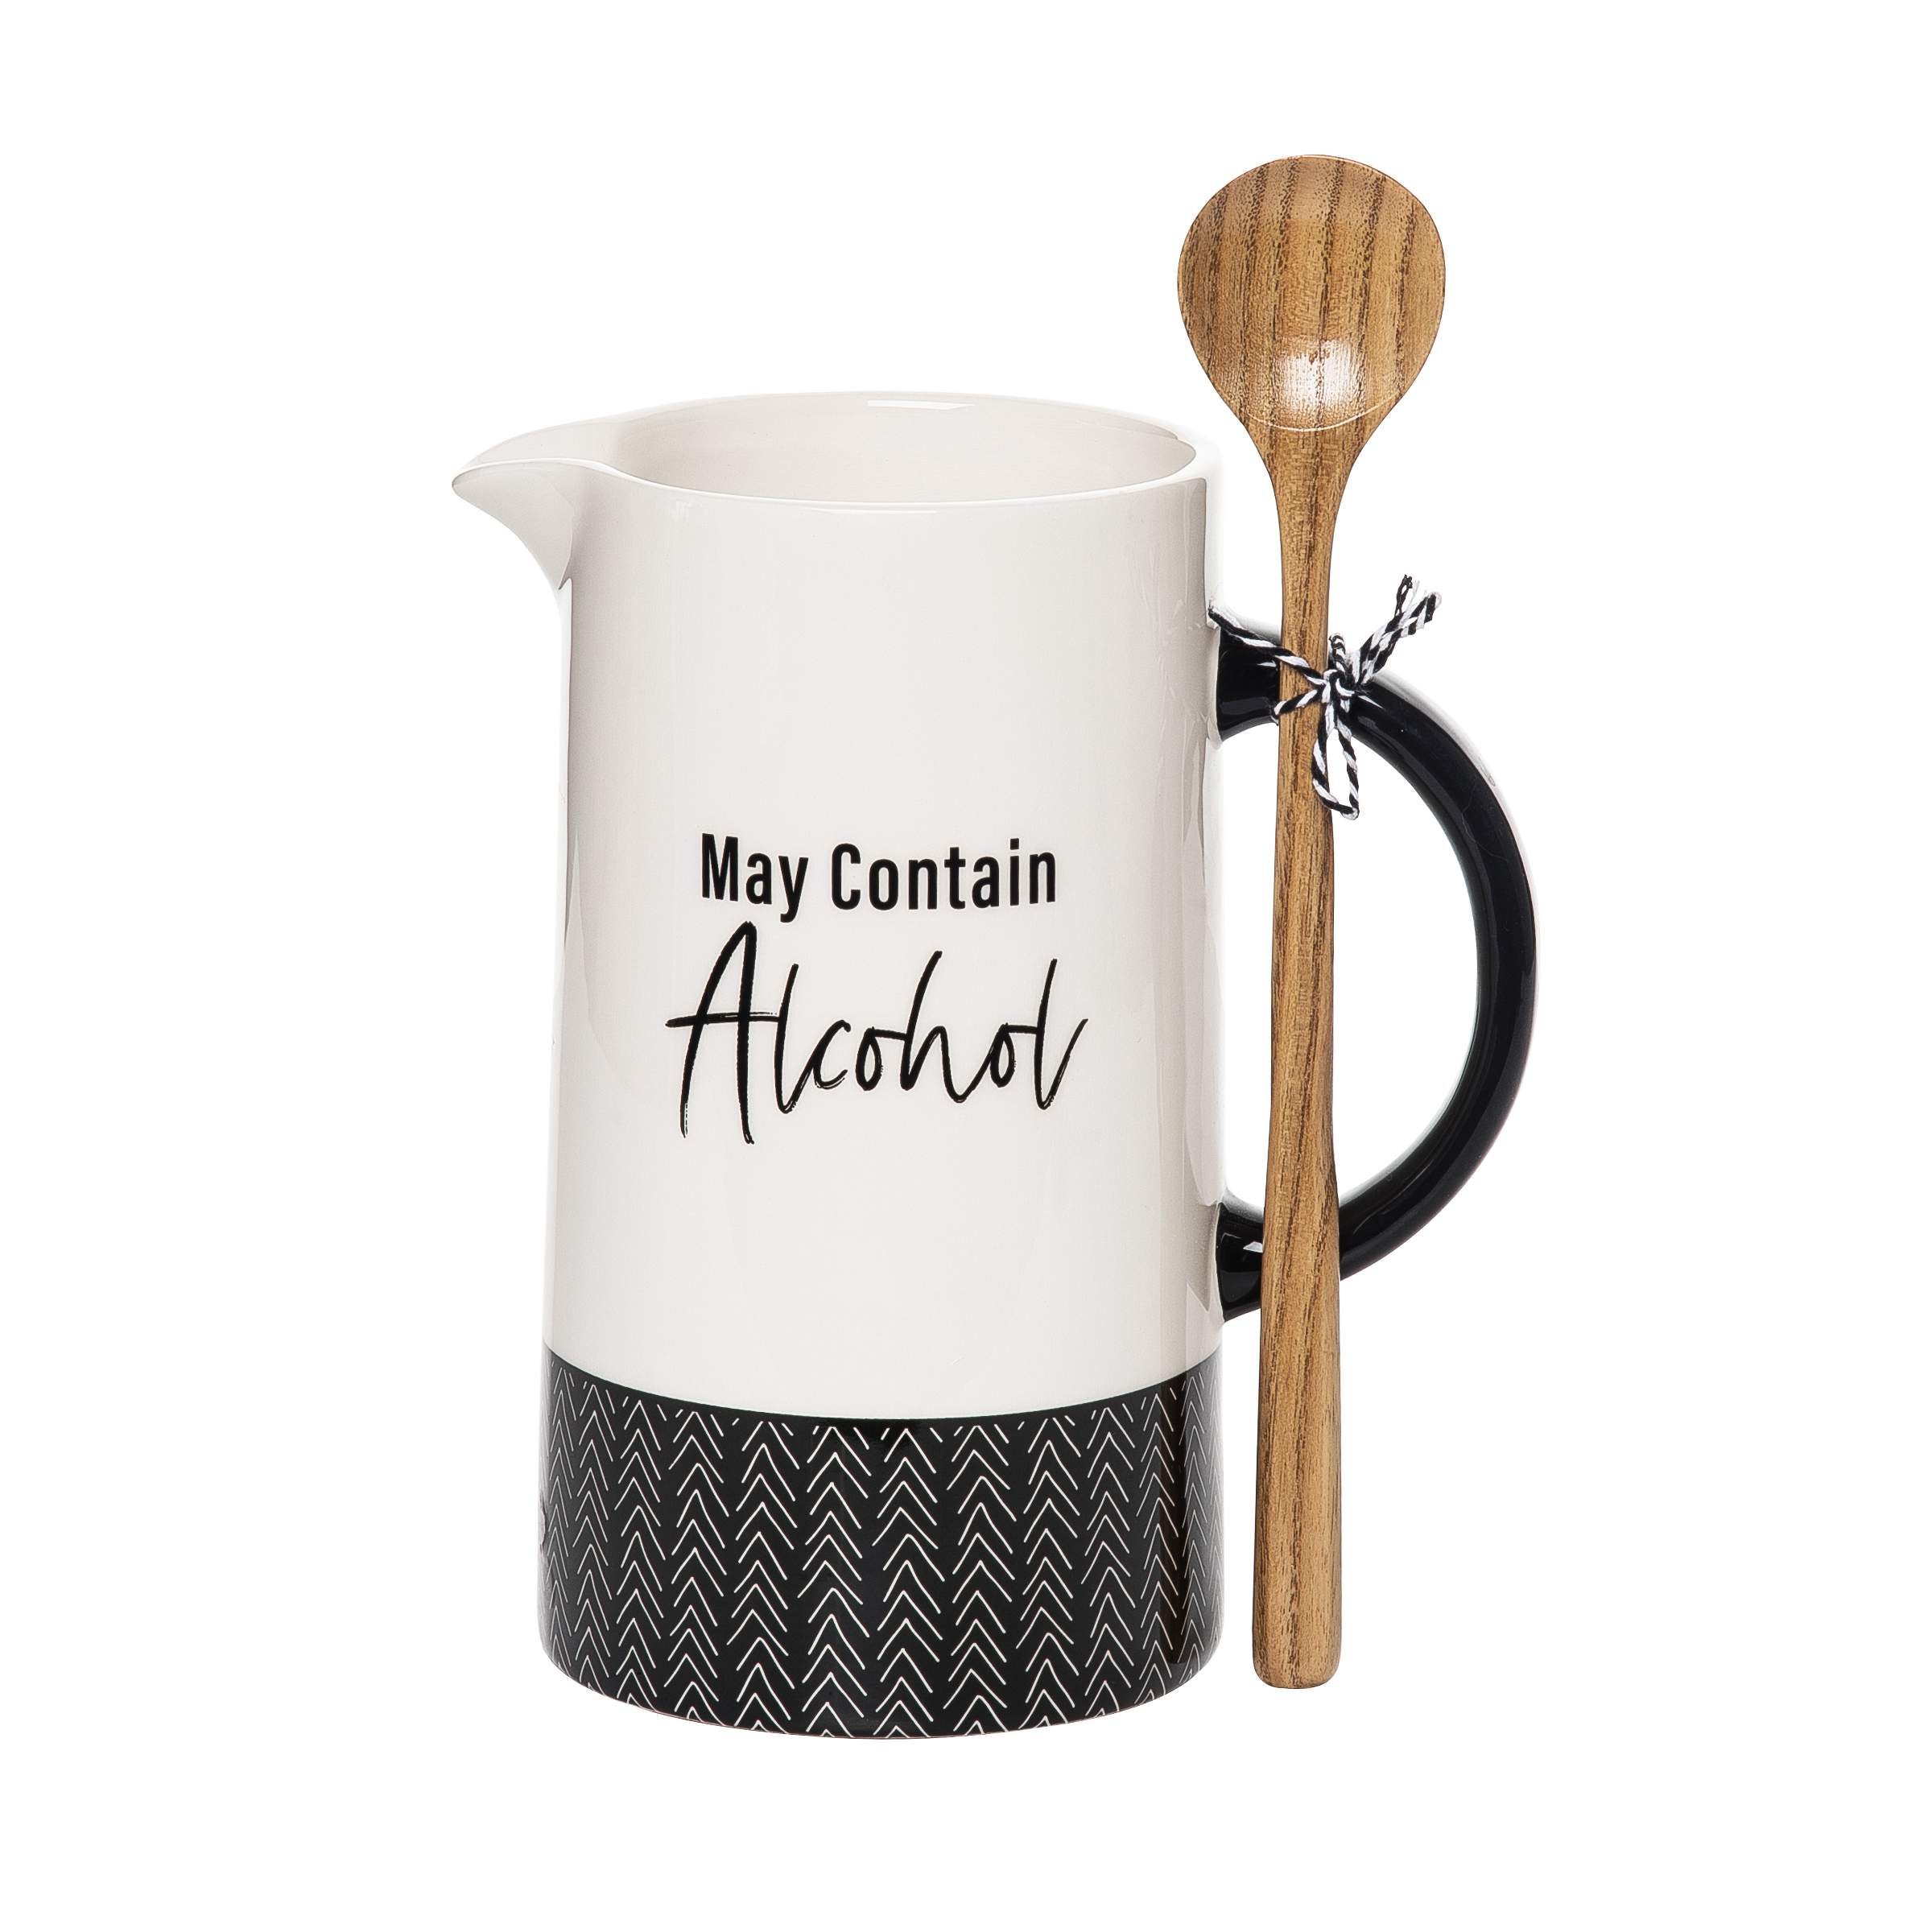 May Contain Alcohol Pitcher With Wooden Spoon 
															/ Totalee Gift							